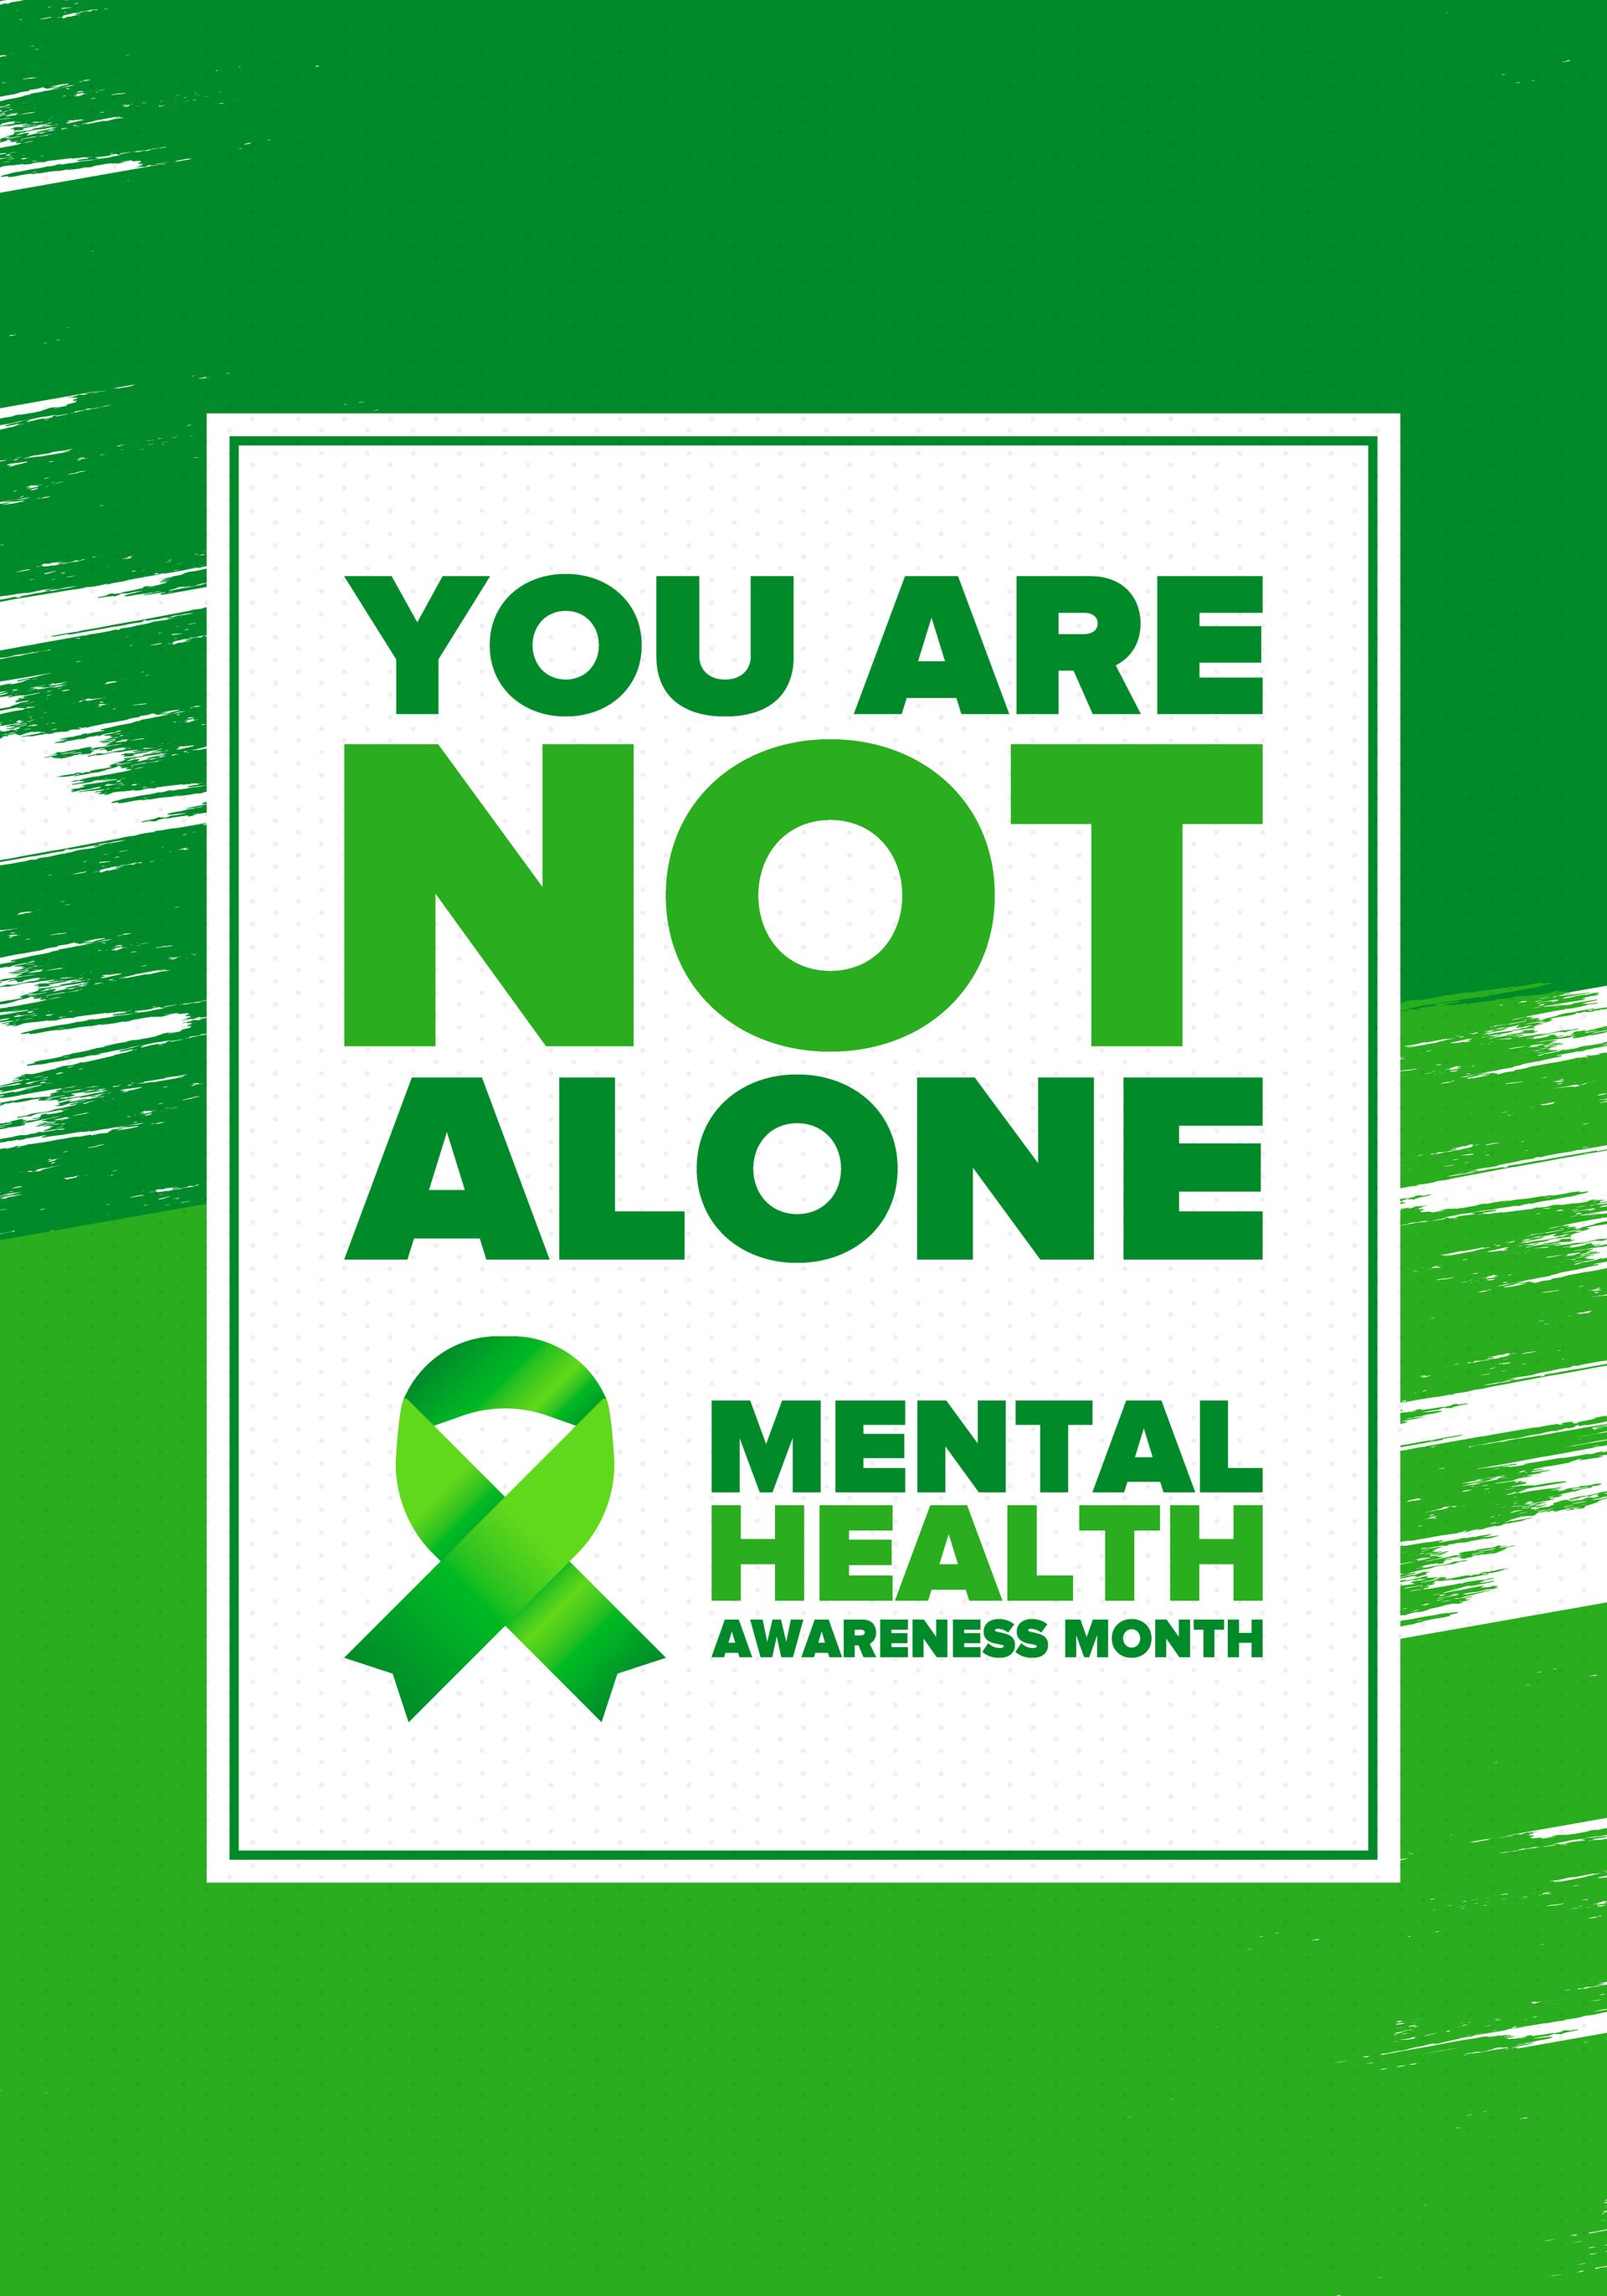 You are not alone; Mental health awareness month banner